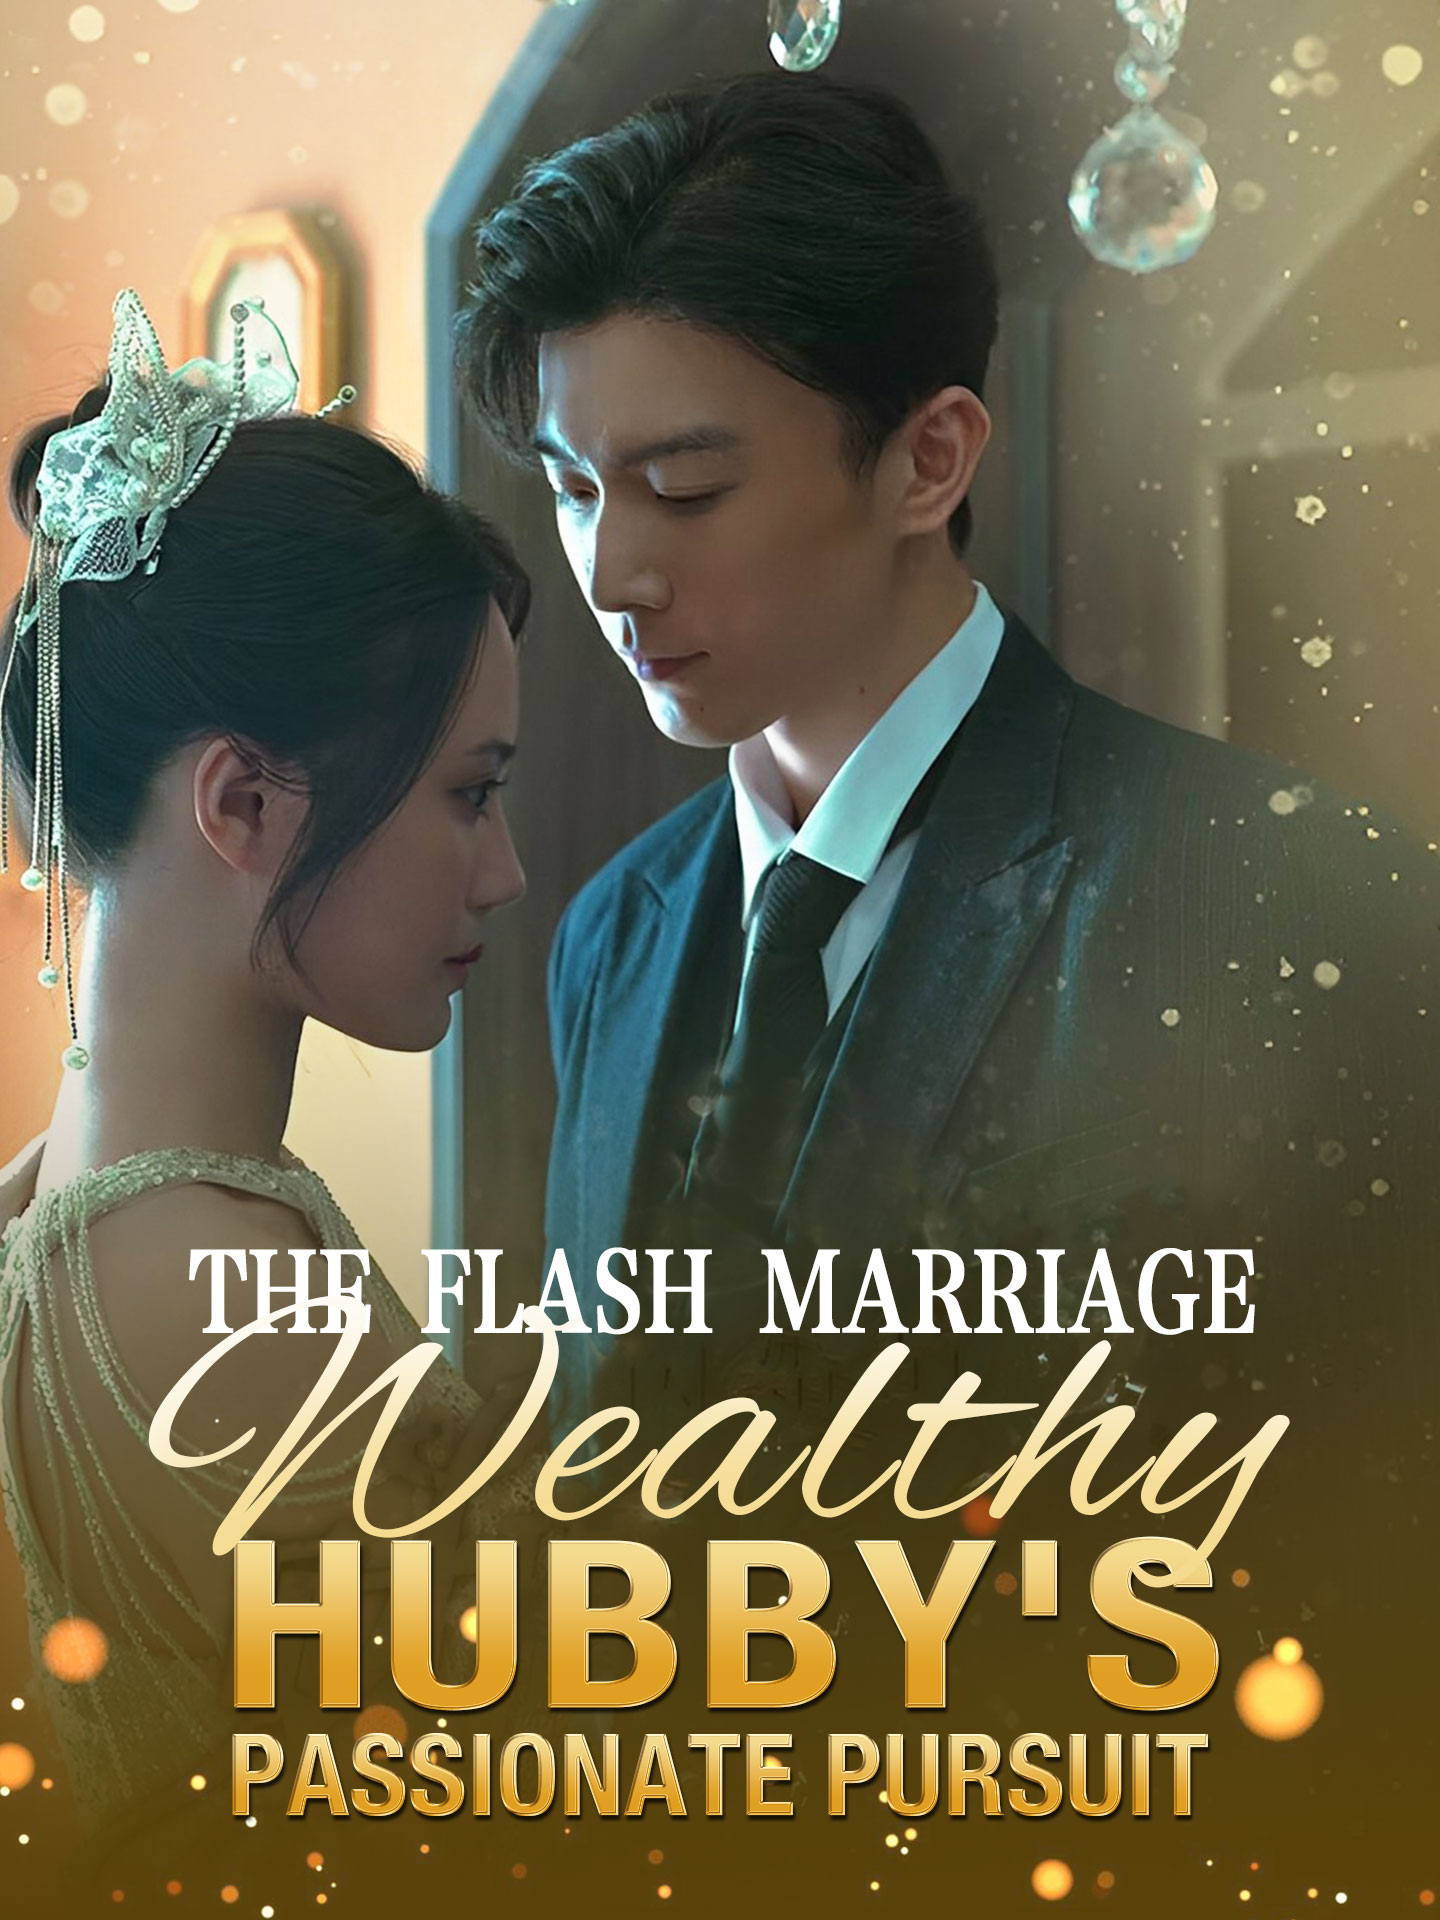 The Flash Marriage: Wealthy Hubby’s Passionate Pursuit